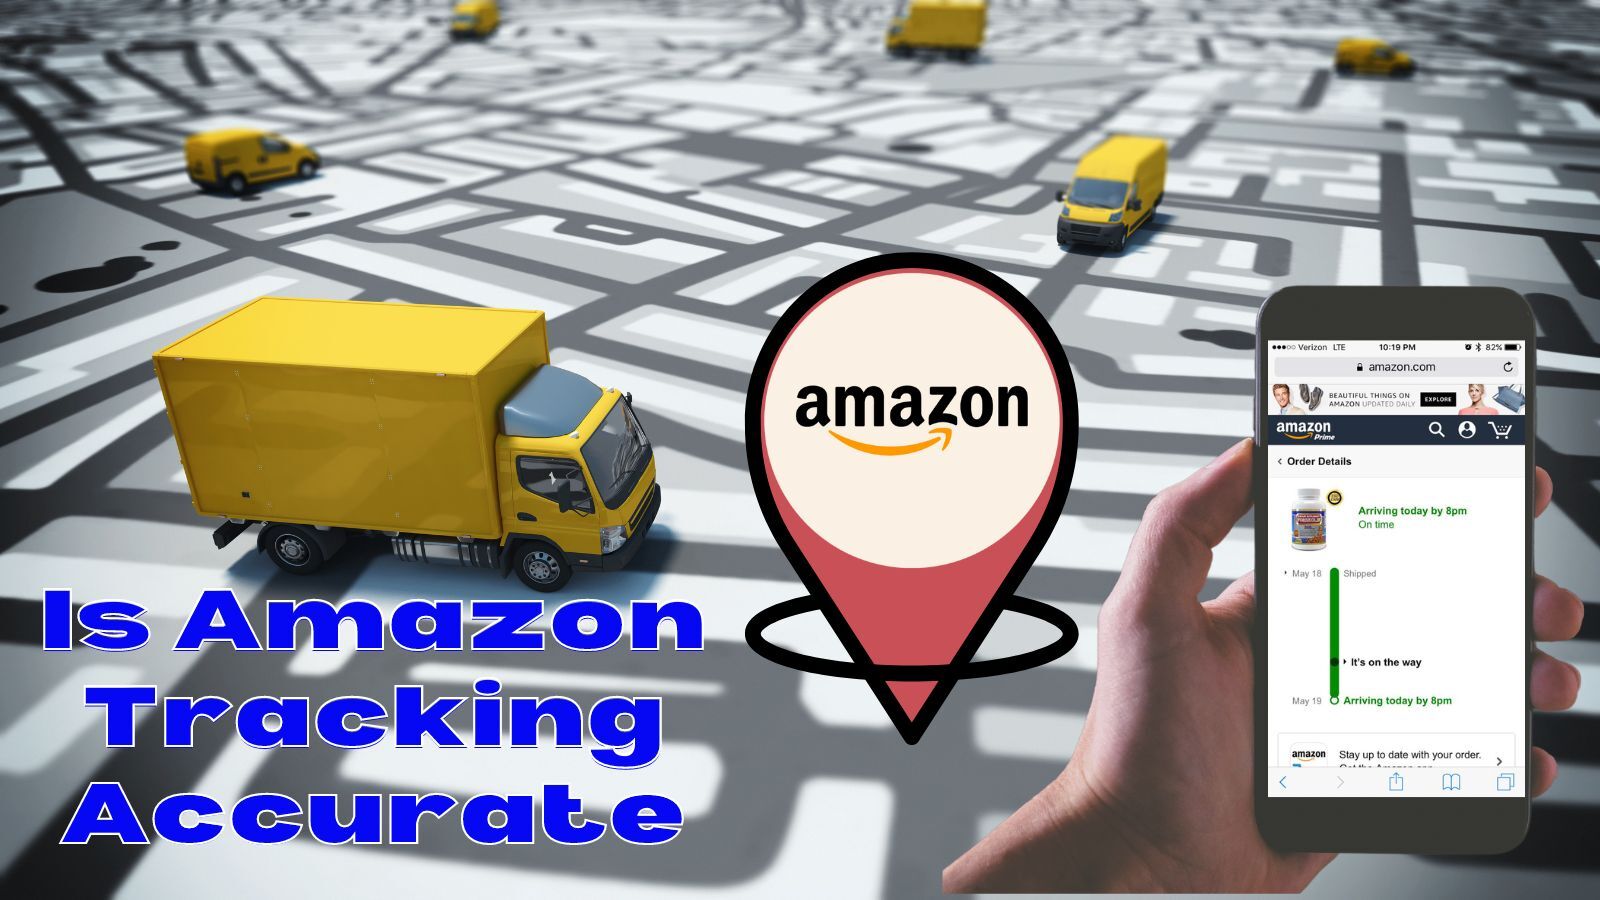 Is Amazon Tracking Accurate?